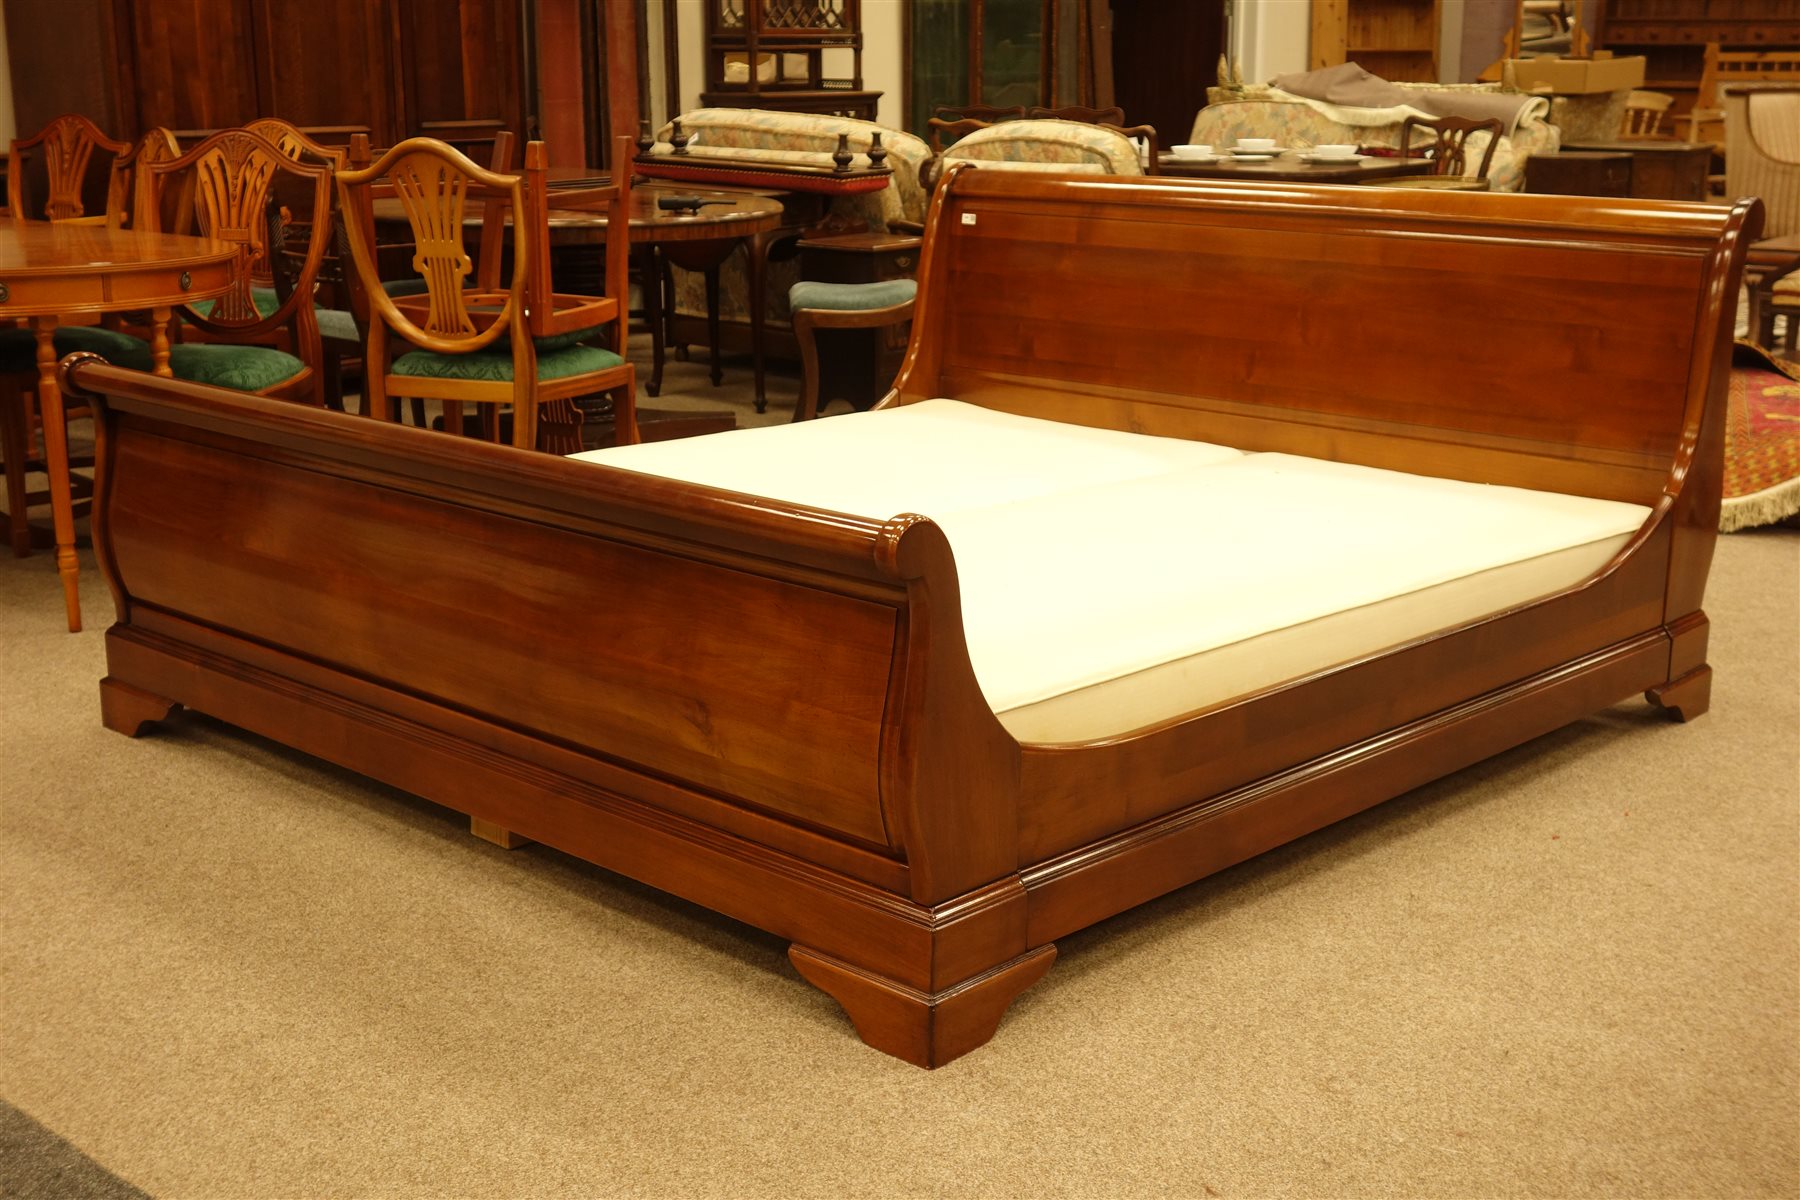 French Cherry Wood 6 Super King Size, Wooden Sleigh King Bed Frame